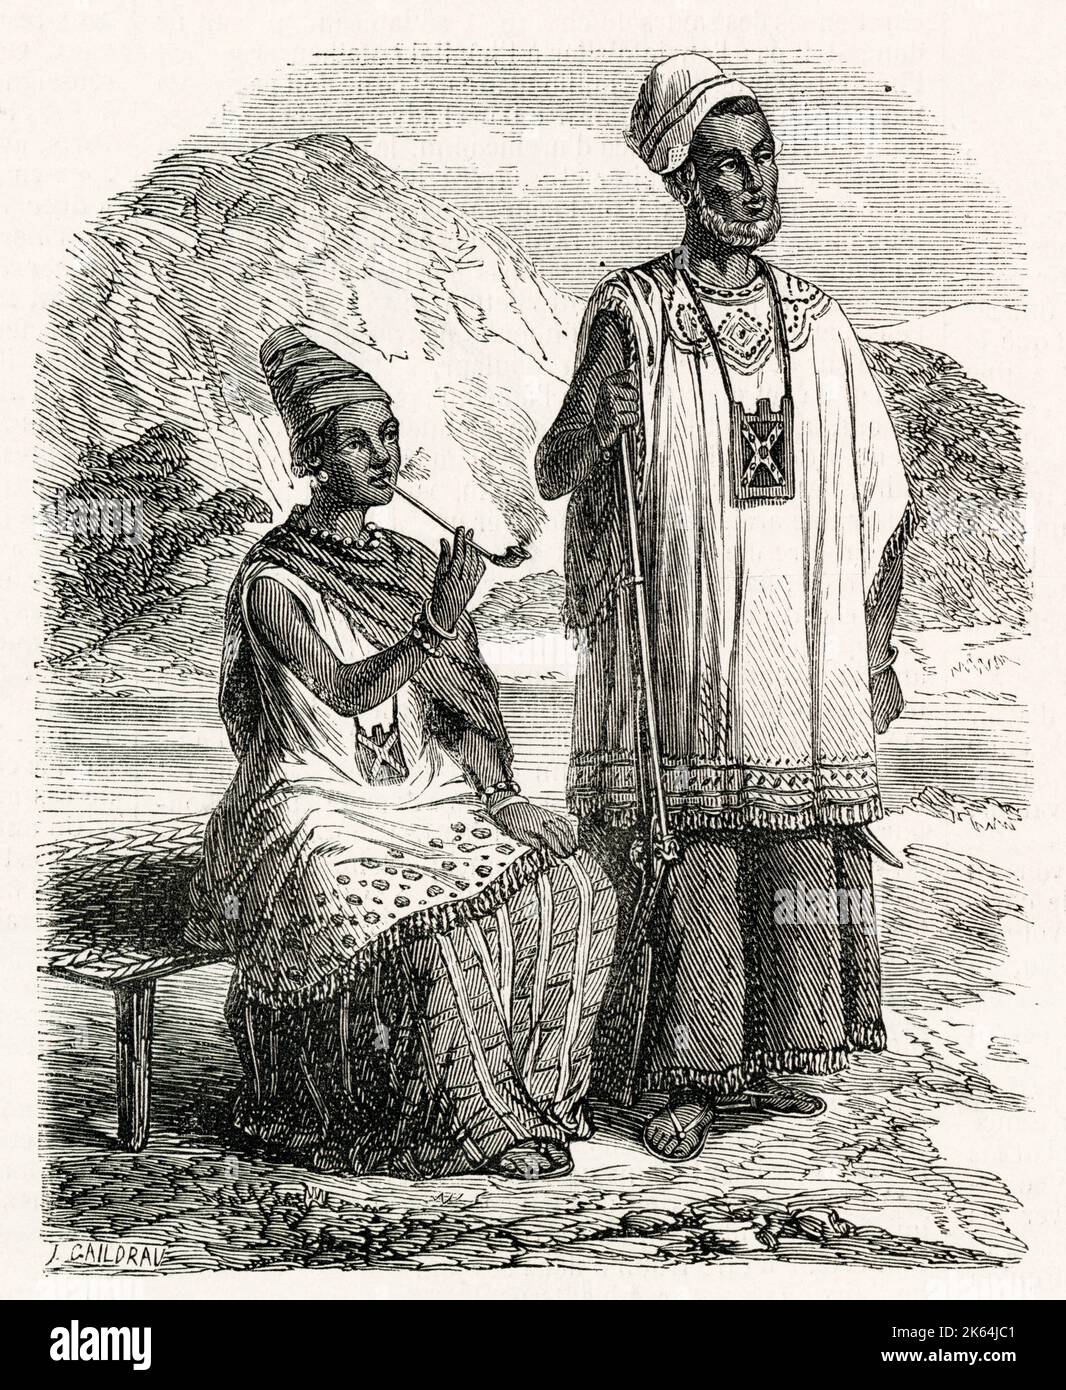 Ndate Yalla Mbodj or Ndateh Yalla Mbooj, (c.1810-1860 or 1814-1856) and her husband, Maaroso Tassé. Ndate Yalla Mbodj was the last great Lingeer (Queen) of Waalo, one of the four Wolof kingdoms of Senegambia located in what is now North-West Senegal. She is pictured in royal dress. Stock Photo